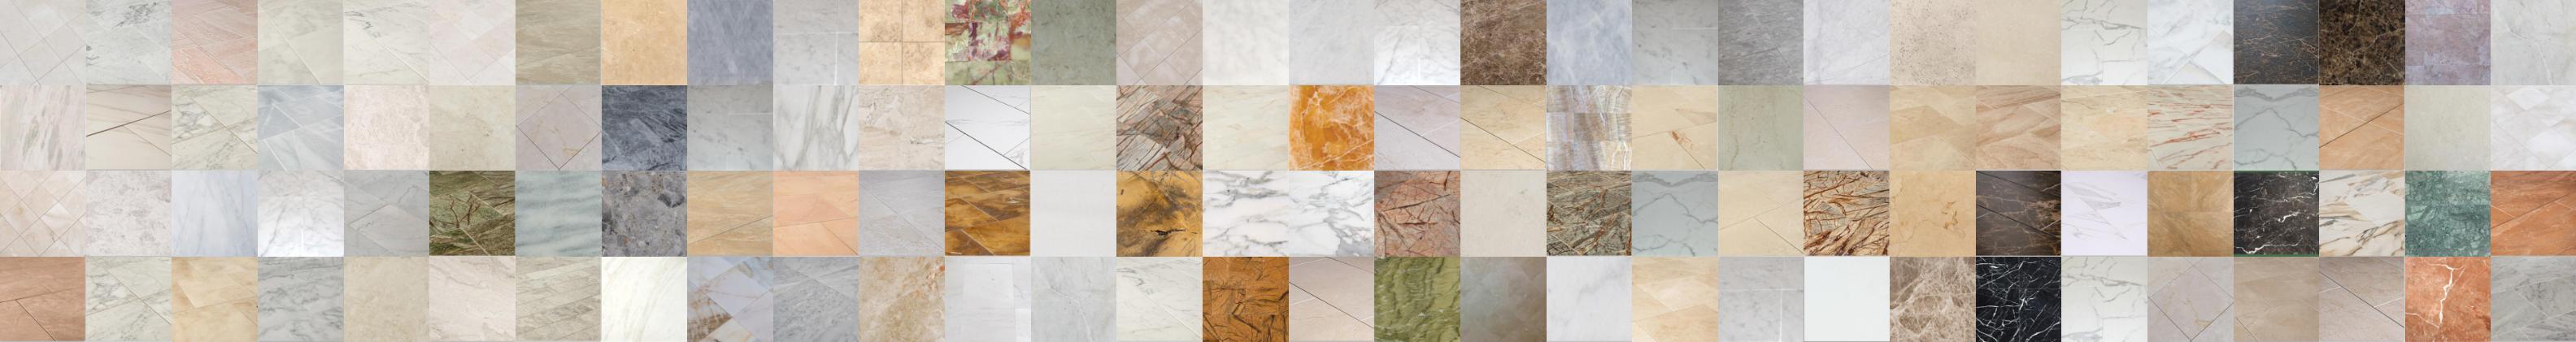 A collage of marble